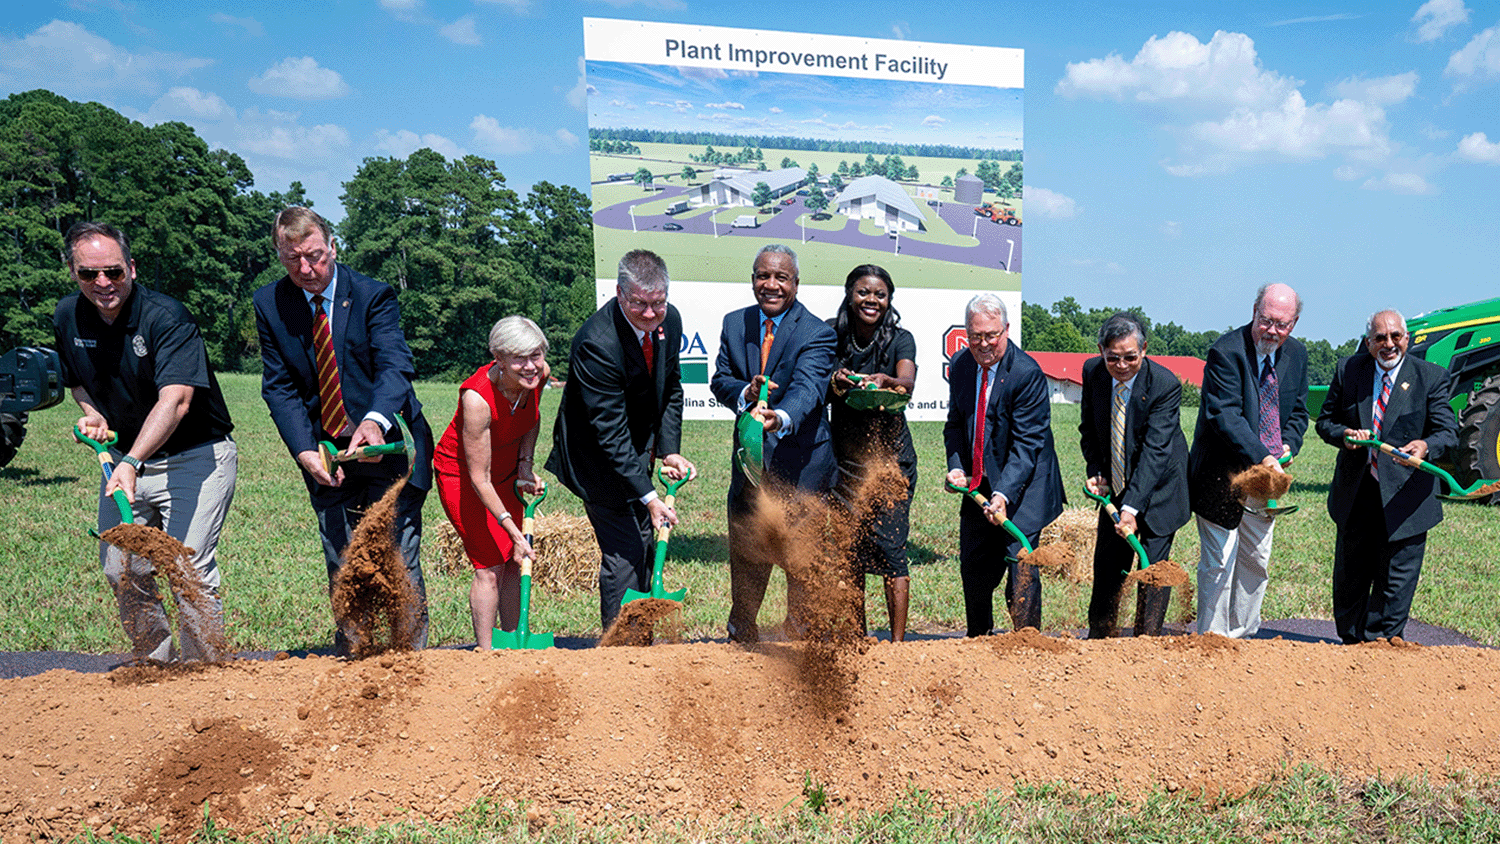 Group shot throwing dirt during Plant Improvement Facility groundbreaking.